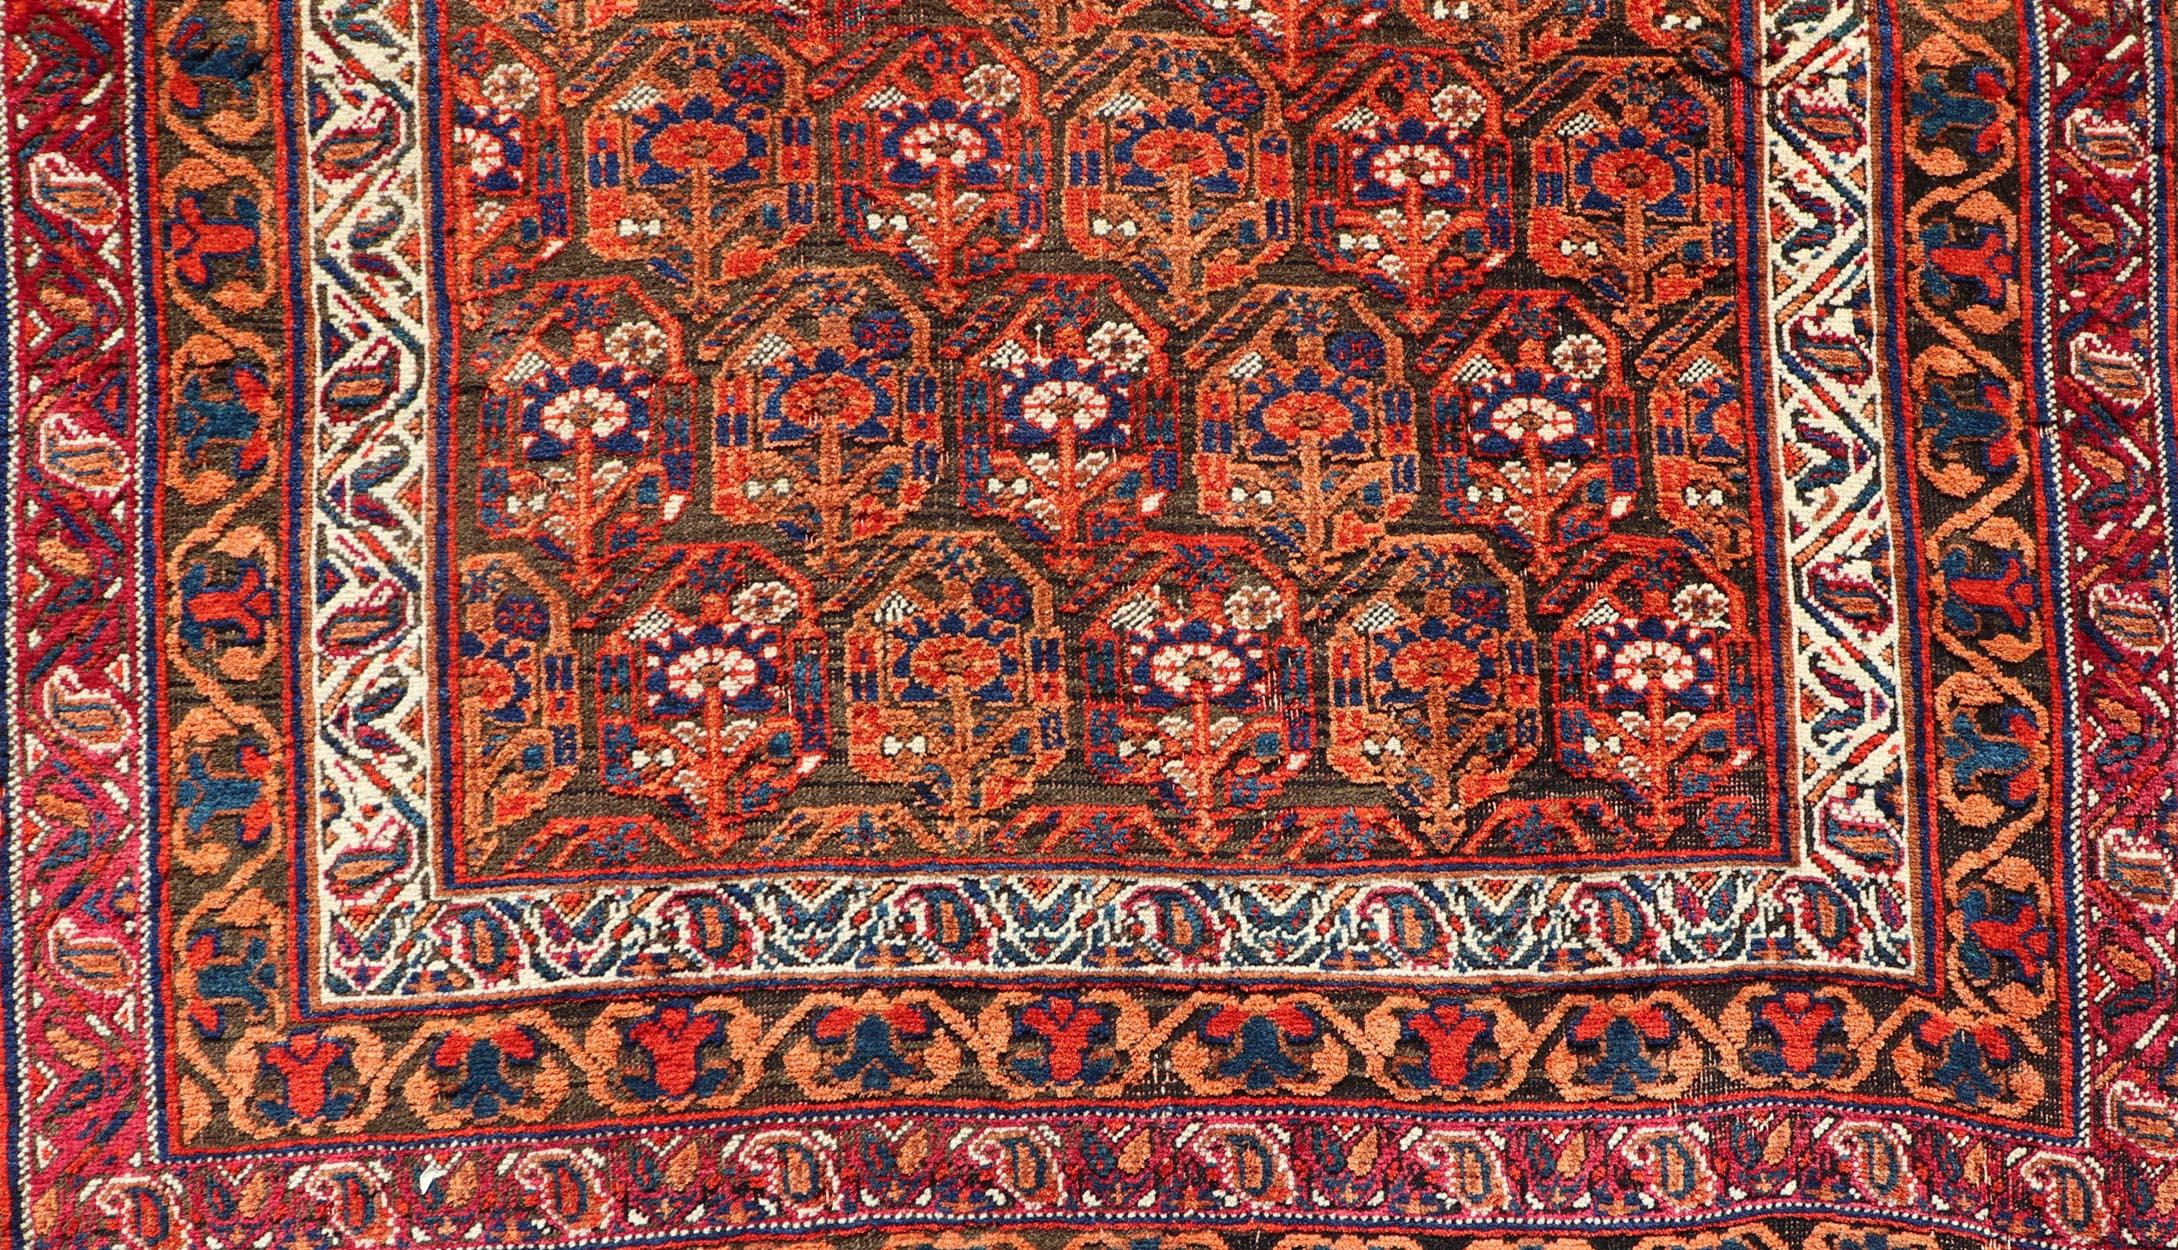 20th Century  Fine Persian Antique Afshar Rug in Orange and Copper Background & Multi Colors For Sale